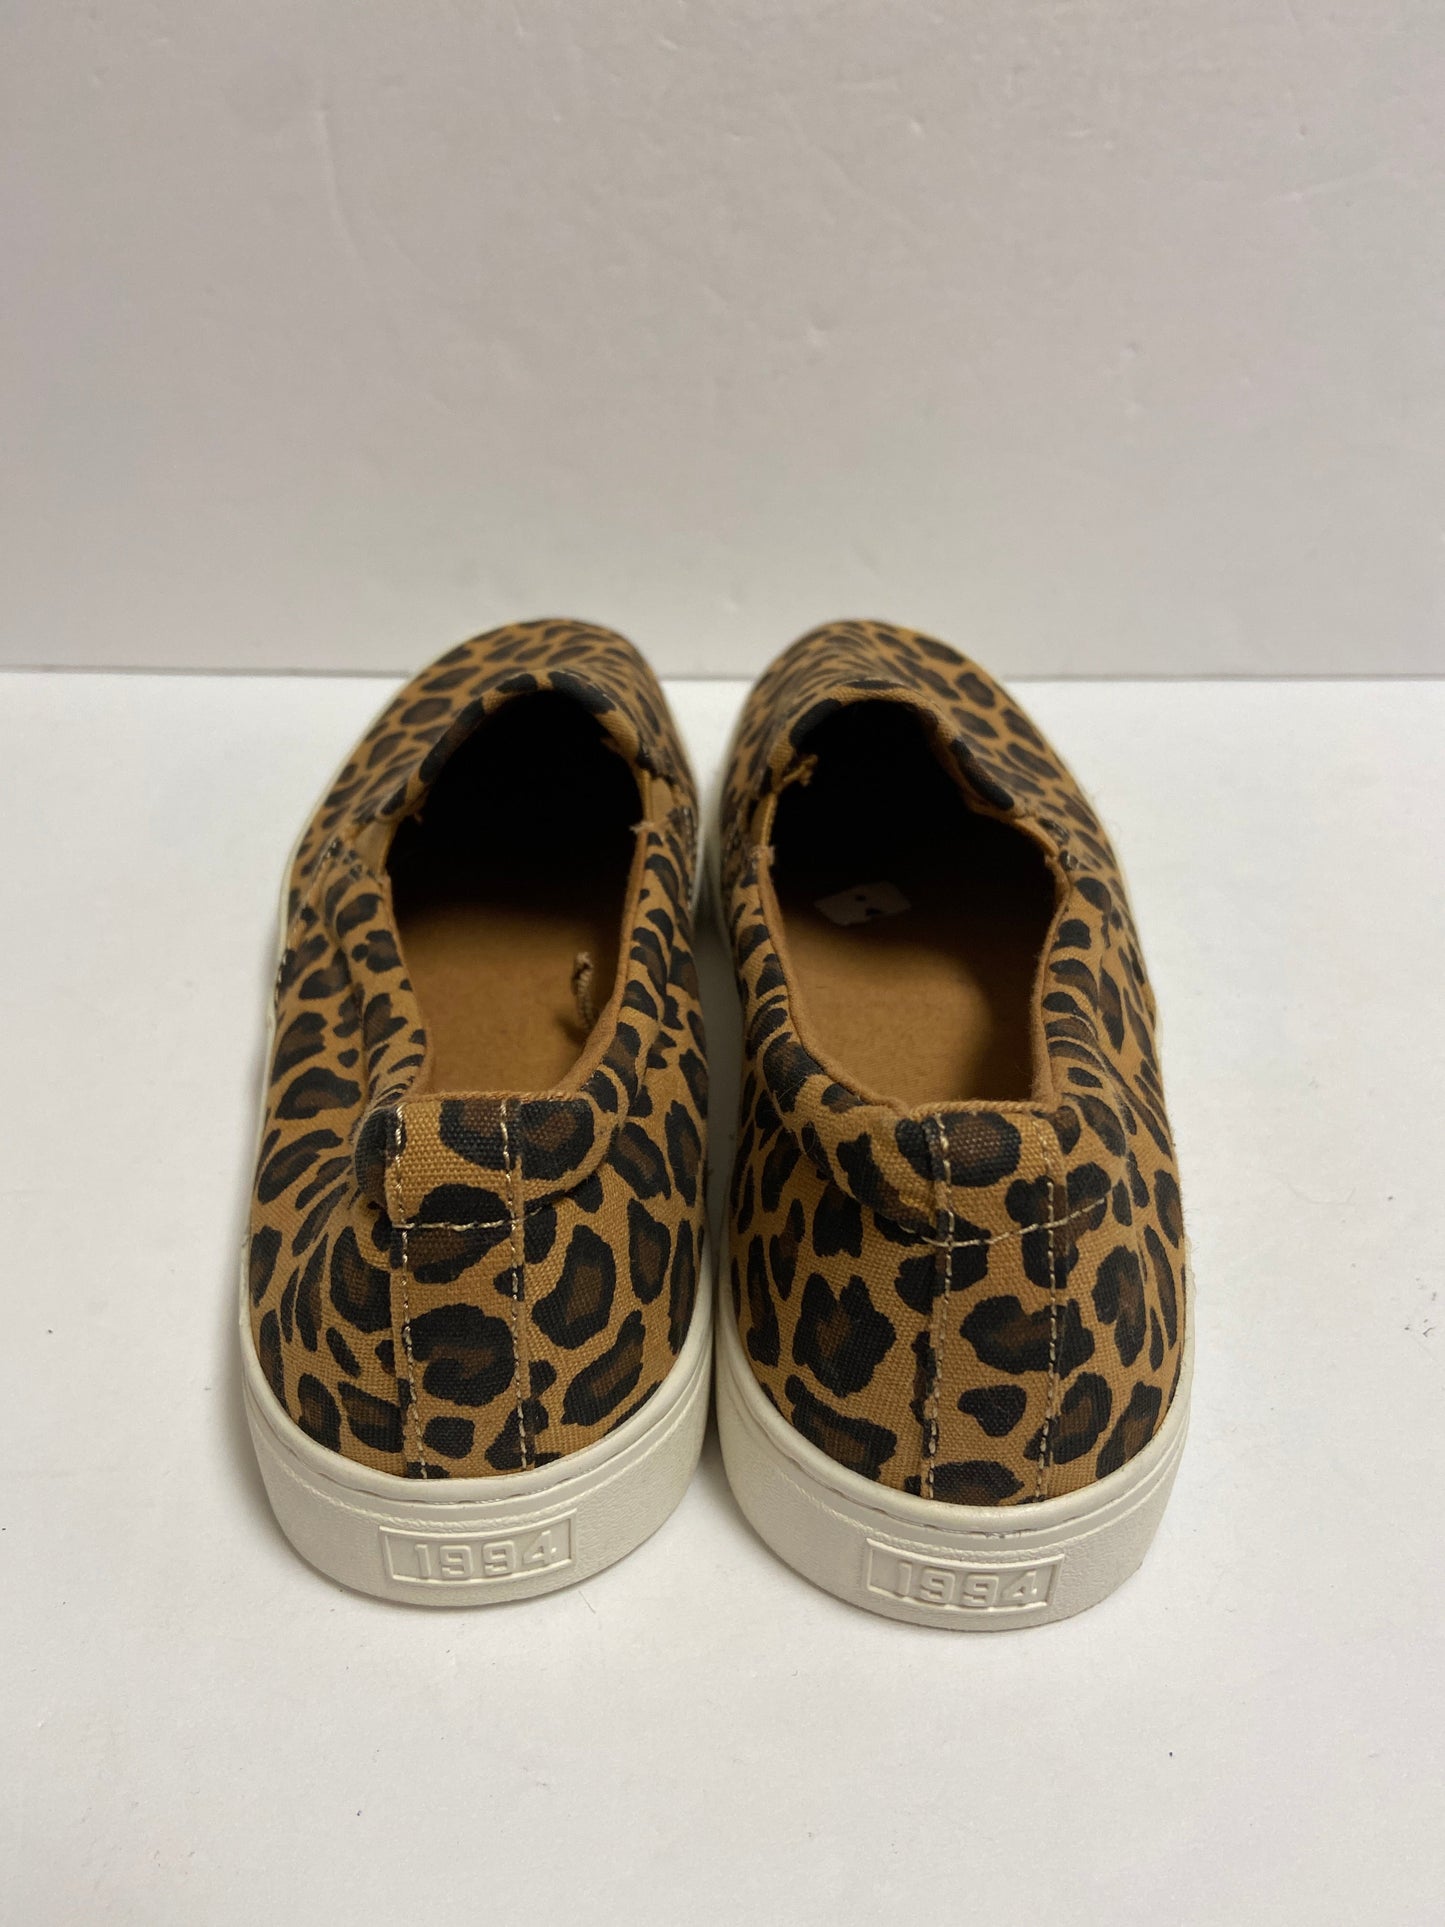 Shoes Flats By Old Navy  Size: 8